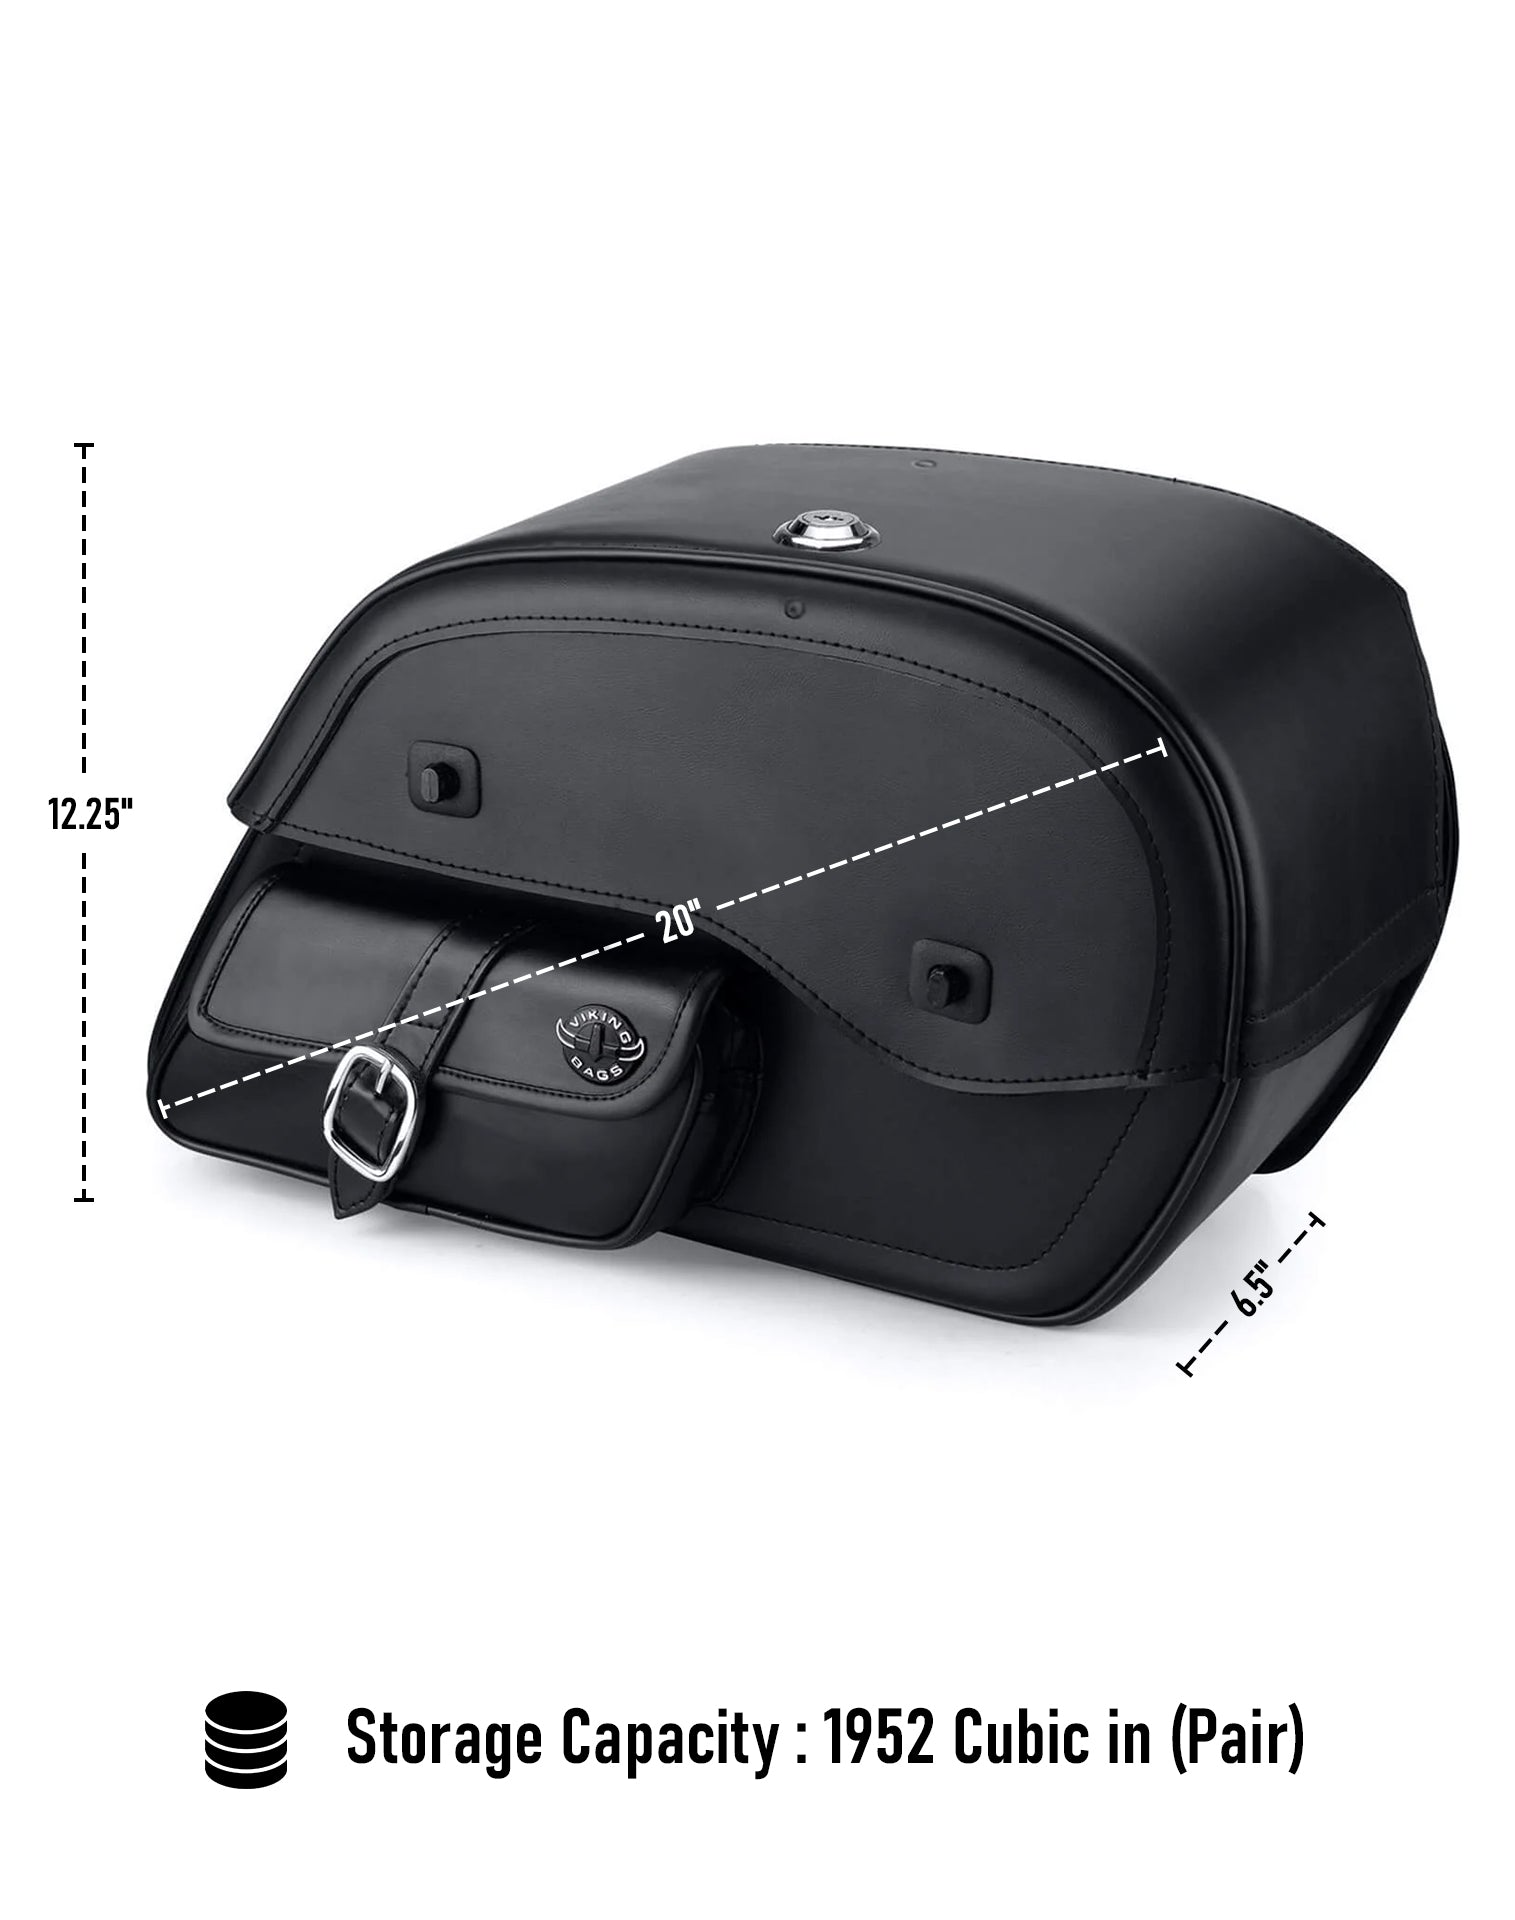 Viking Essential Side Pocket Large Victory High Ball Leather Motorcycle Saddlebags Can Store Your Ridings Gears